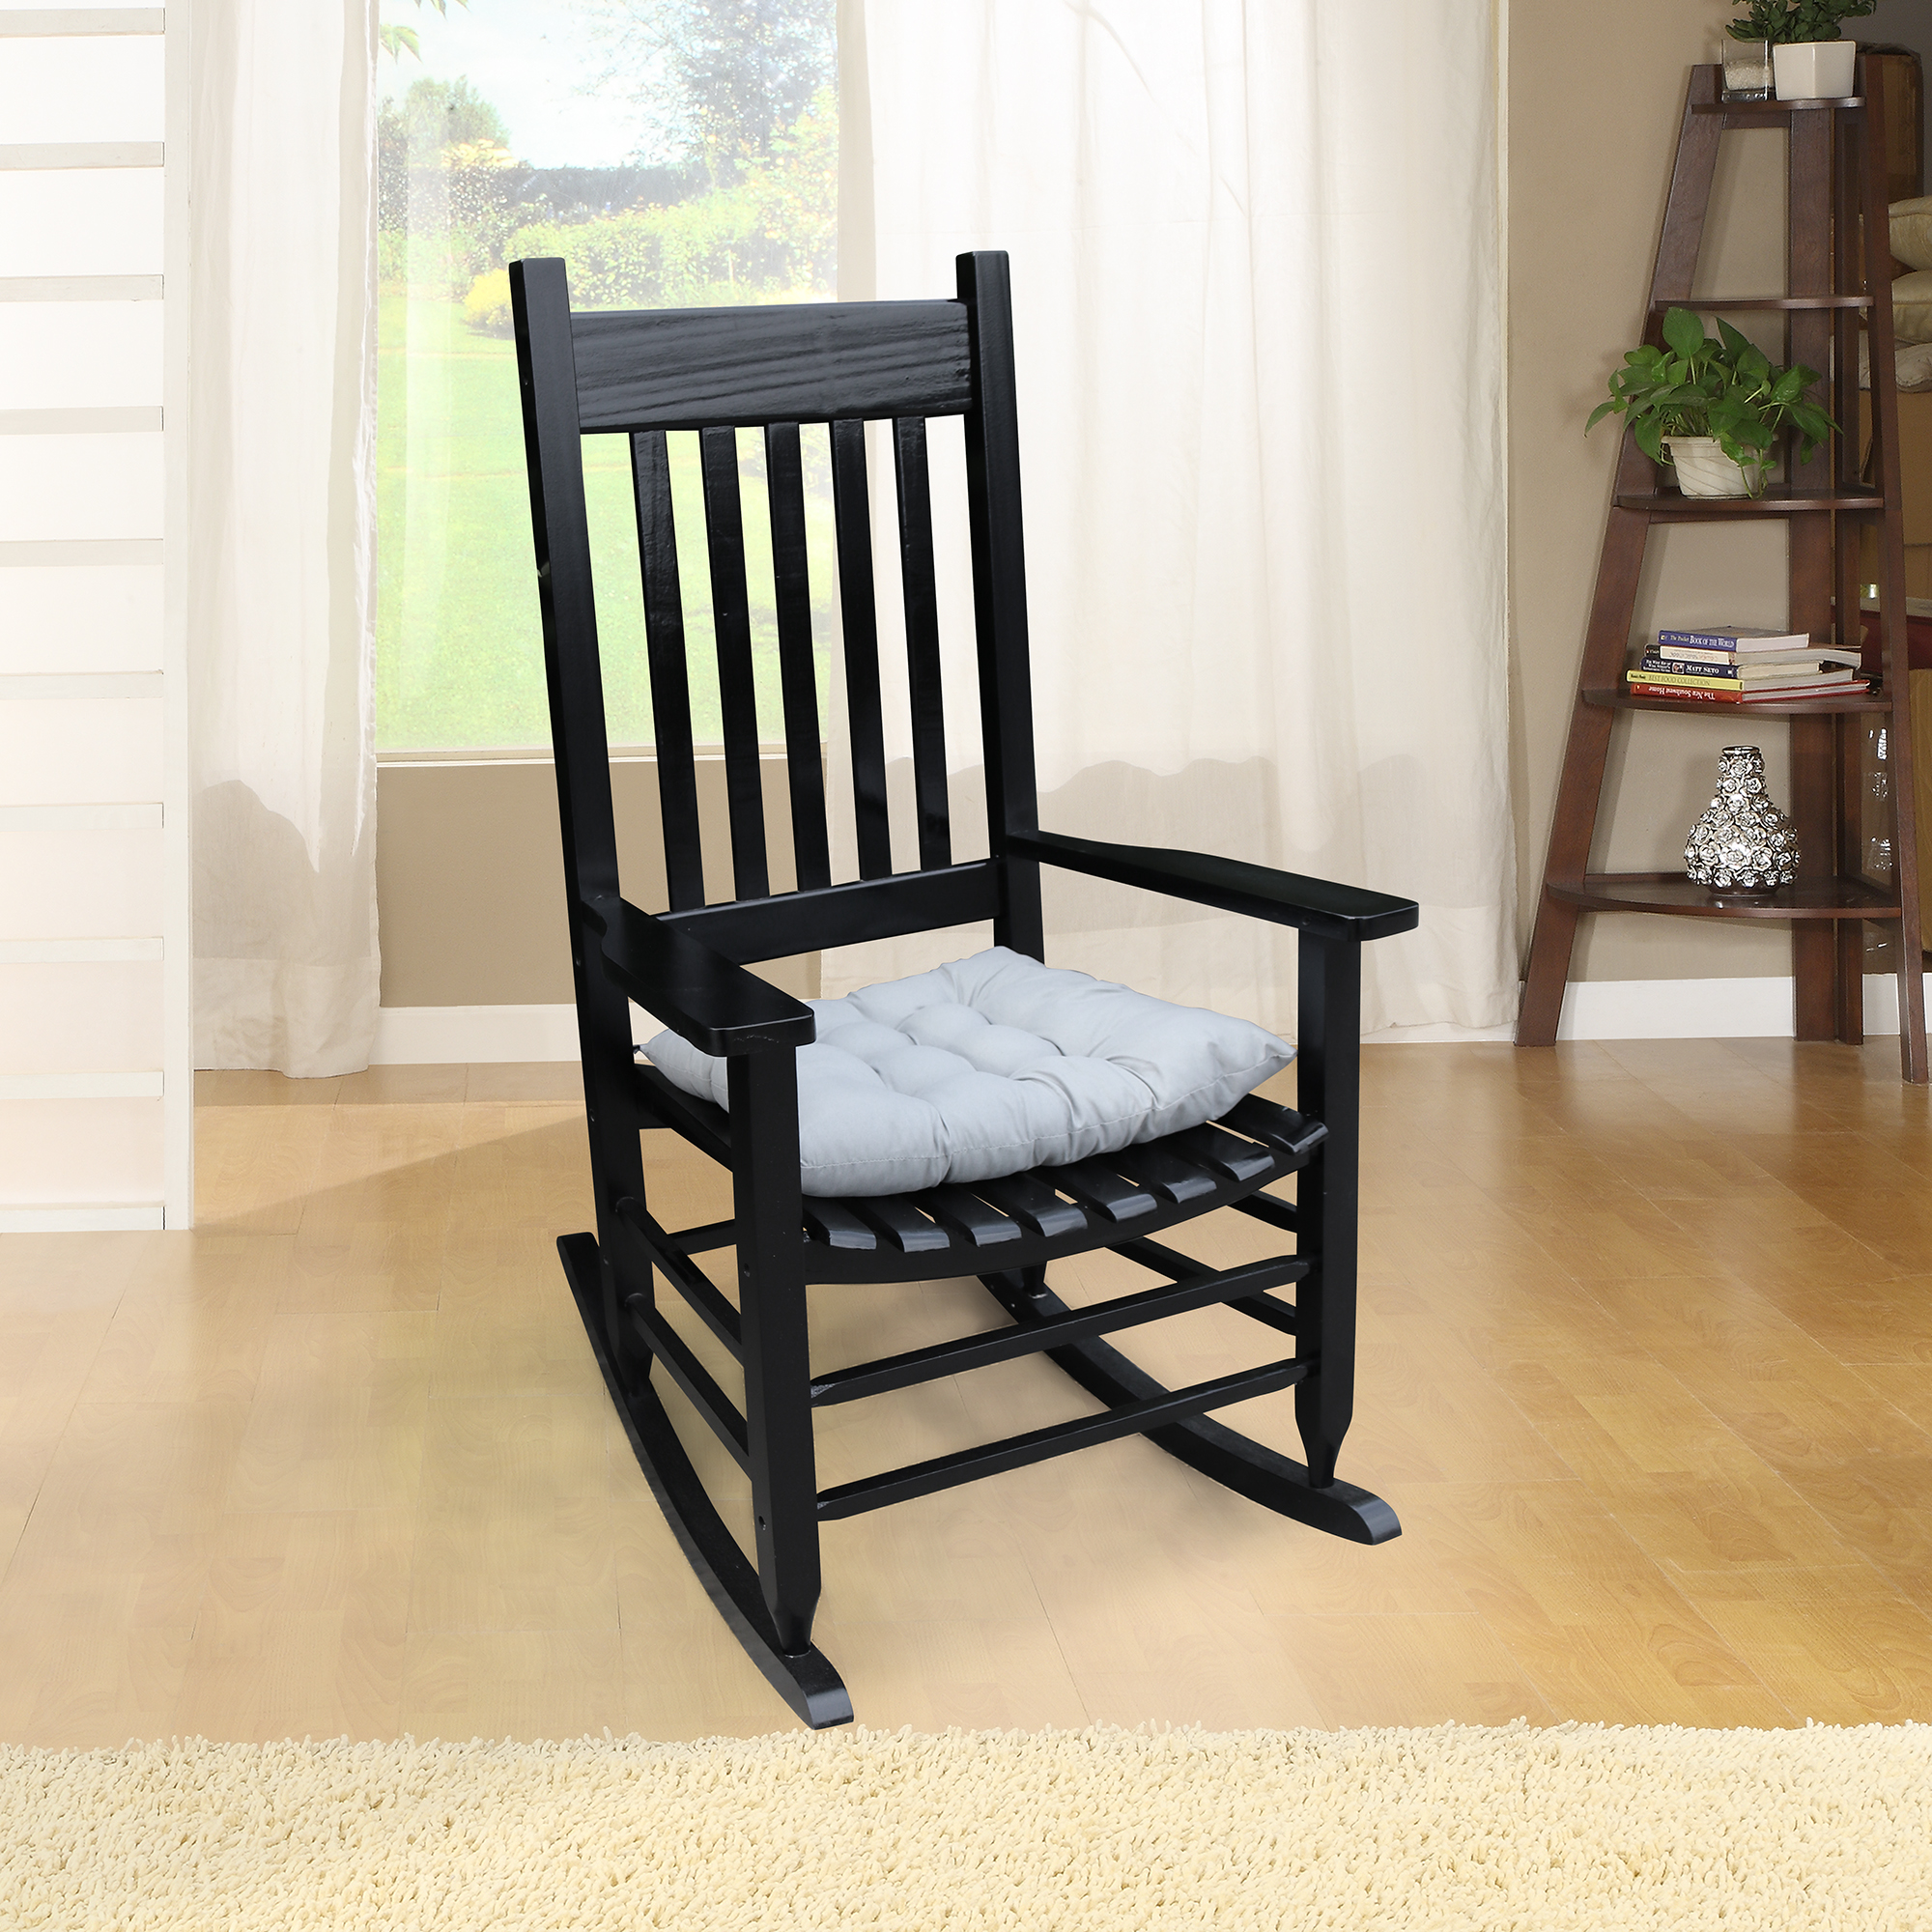 Nine Bull Wooden Porch Rocker Chair, Rocking Lounge Chair for Patio Balcony Yard, Black - image 2 of 5